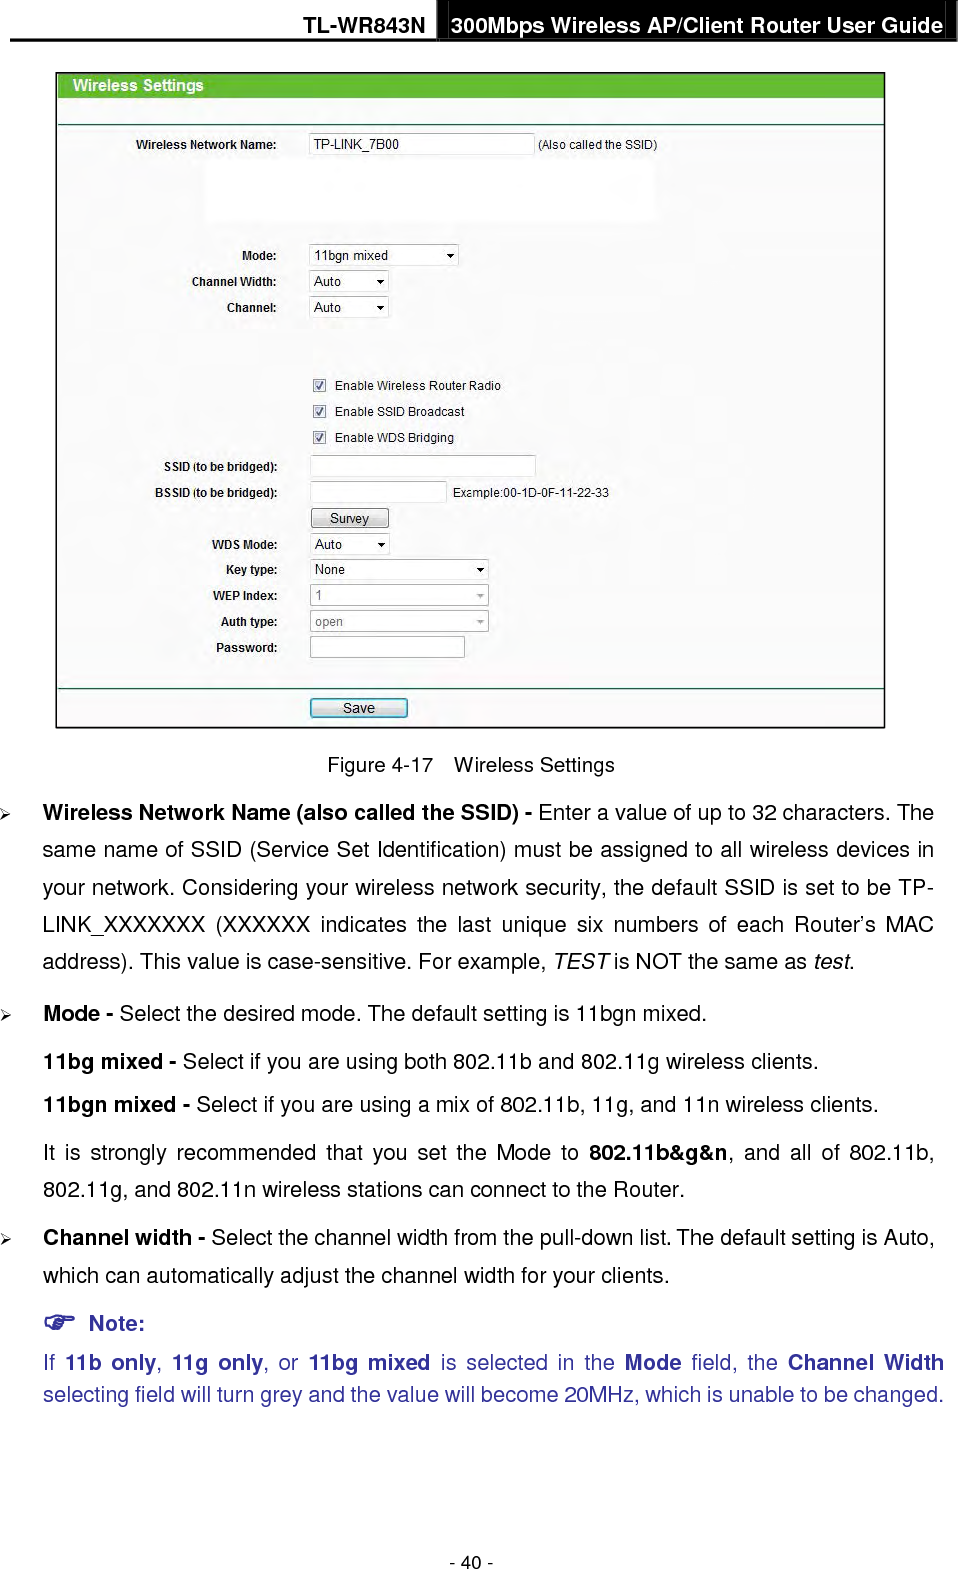 TL-WR843N 300Mbps Wireless AP/Client Router User Guide - 40 - Figure 4-17  Wireless Settings Wireless Network Name (also called the SSID) - Enter a value of up to 32 characters. Thesame name of SSID (Service Set Identification) must be assigned to all wireless devices inyour network. Considering your wireless network security, the default SSID is set to be TP-LINK_XXXXXXX  (XXXXXX indicates the last unique six numbers of each Router’s MACaddress). This value is case-sensitive. For example, TEST is NOT the same as test.Mode - Select the desired mode. The default setting is 11bgn mixed.11bg mixed - Select if you are using both 802.11b and 802.11g wireless clients.11bgn mixed - Select if you are using a mix of 802.11b, 11g, and 11n wireless clients.It is strongly recommended that you set the Mode to 802.11b&amp;g&amp;n, and all of 802.11b,802.11g, and 802.11n wireless stations can connect to the Router.Channel width - Select the channel width from the pull-down list. The default setting is Auto,which can automatically adjust the channel width for your clients. Note:If  11b only,  11g only, or 11bg mixed is selected in the Mode  field, the Channel Widthselecting field will turn grey and the value will become 20MHz, which is unable to be changed.